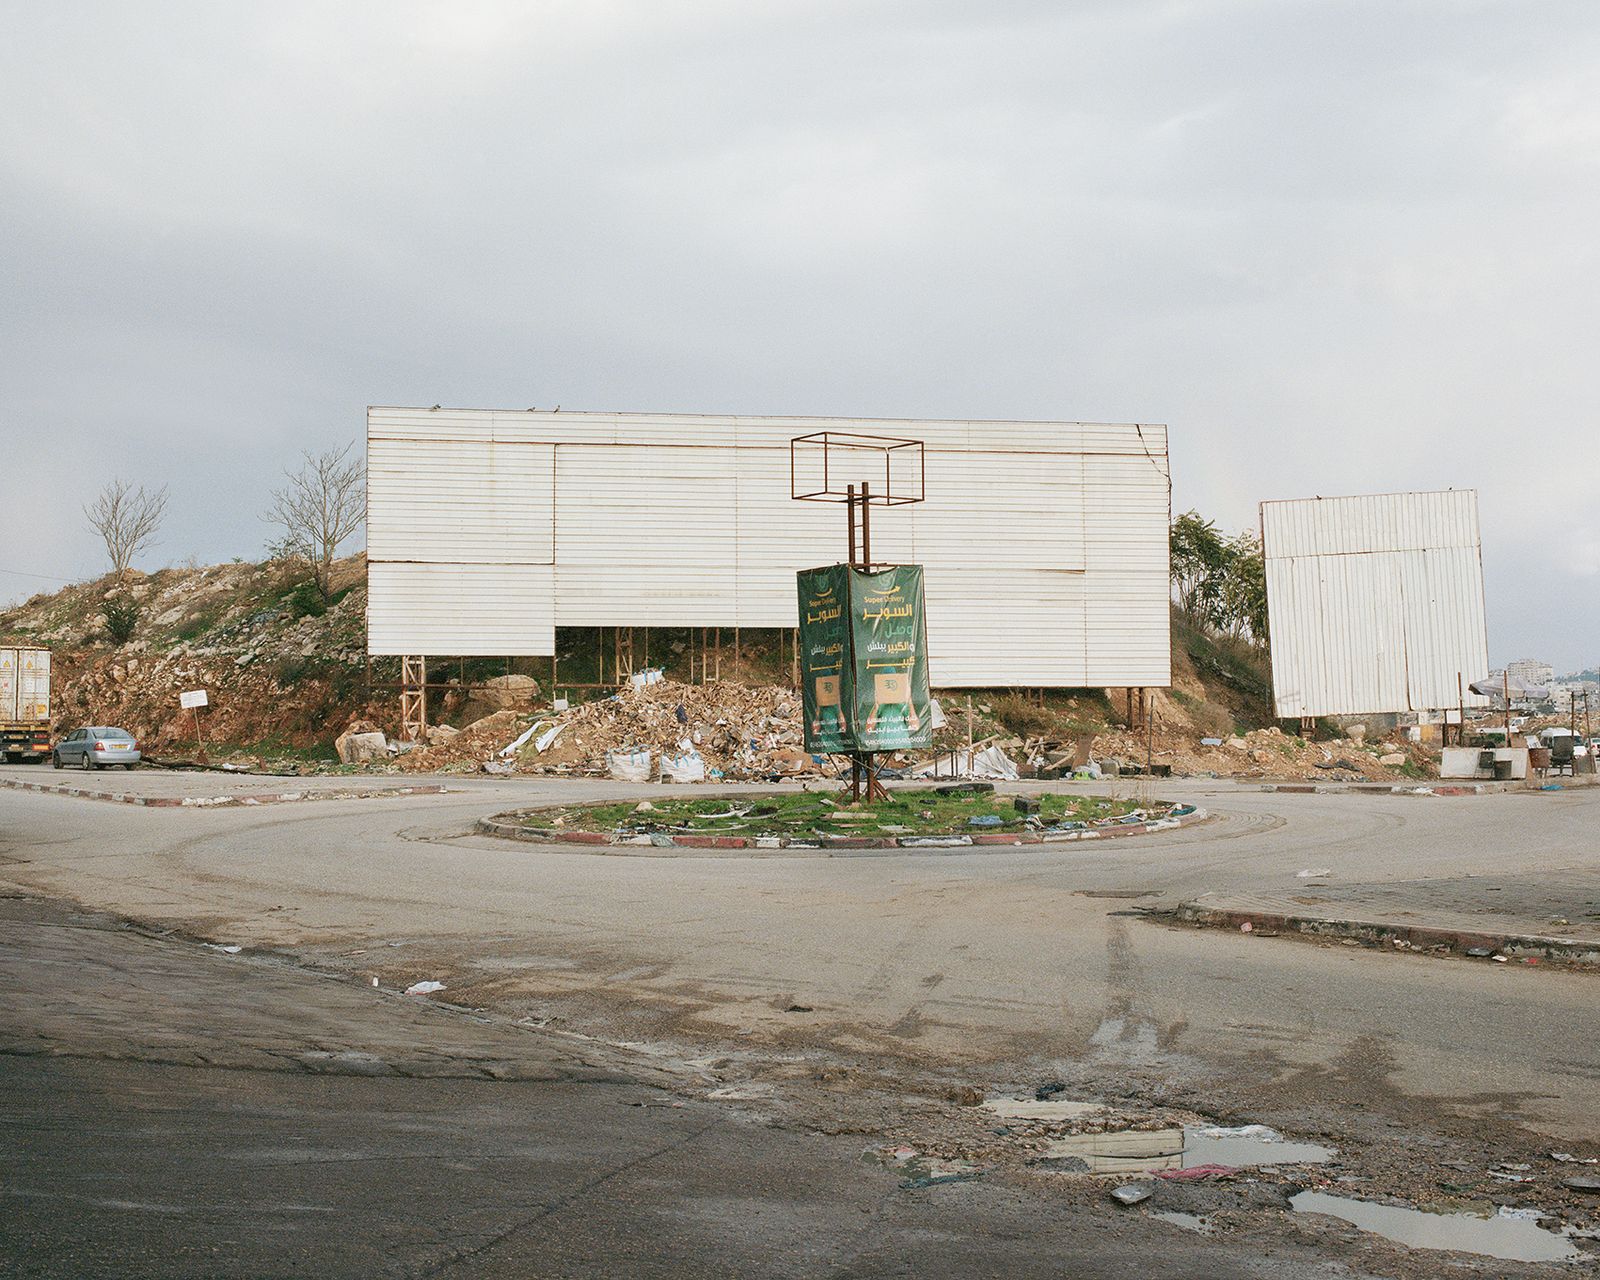 © Saja Quttaineh - Blank billboards due to the corona pandemic in Al-Ram town, 2021.